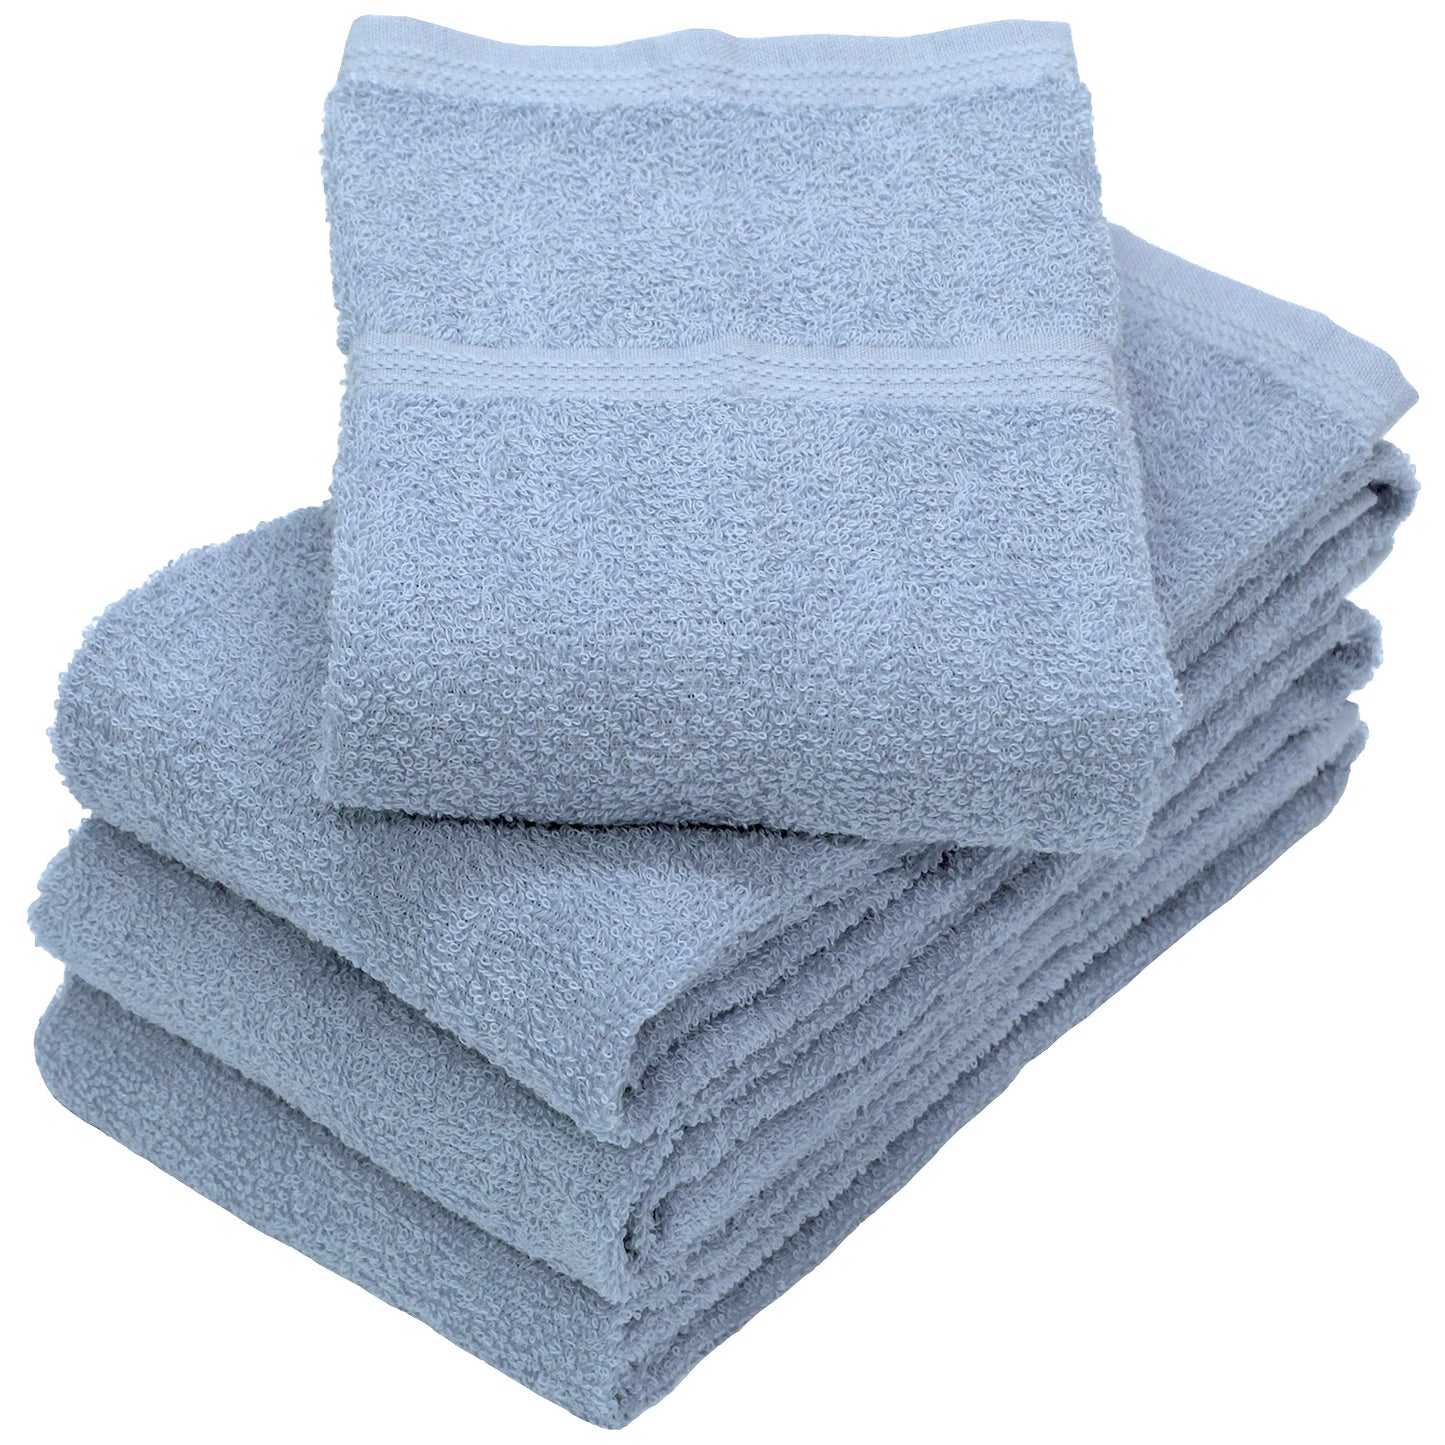 Hiorie Daily Use Water-Absorption Soft Mini Bath Towel 4 Sheets cotton Japan